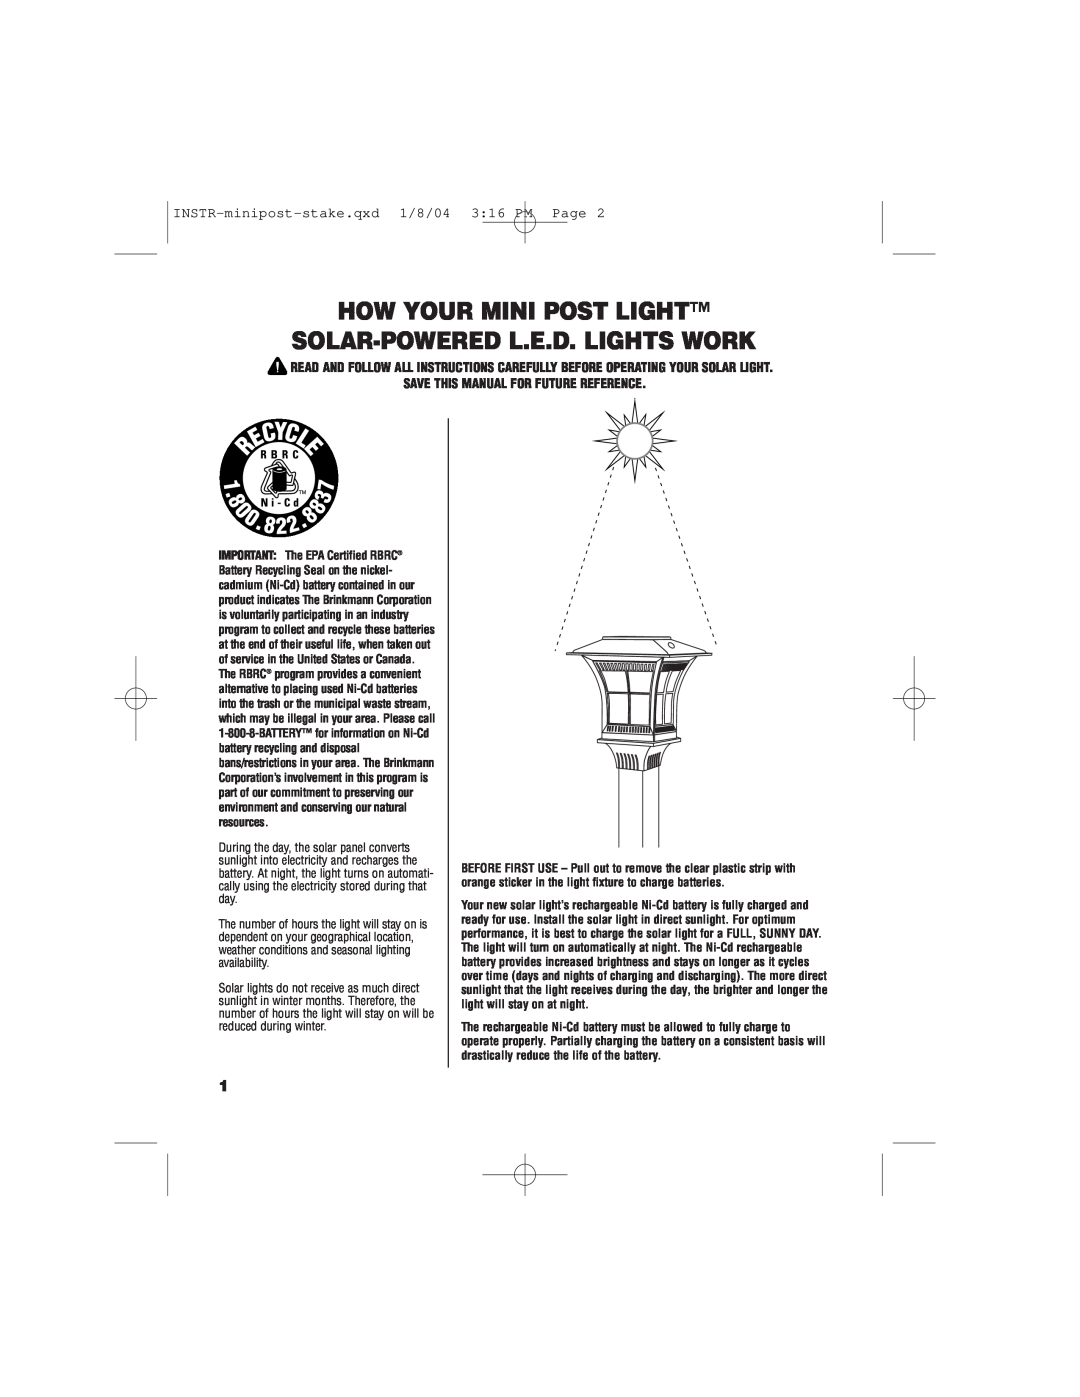 Brinkmann 822-2500-2 How Your Mini Post Light, Solar-Poweredl.E.D. Lights Work, Save This Manual For Future Reference 